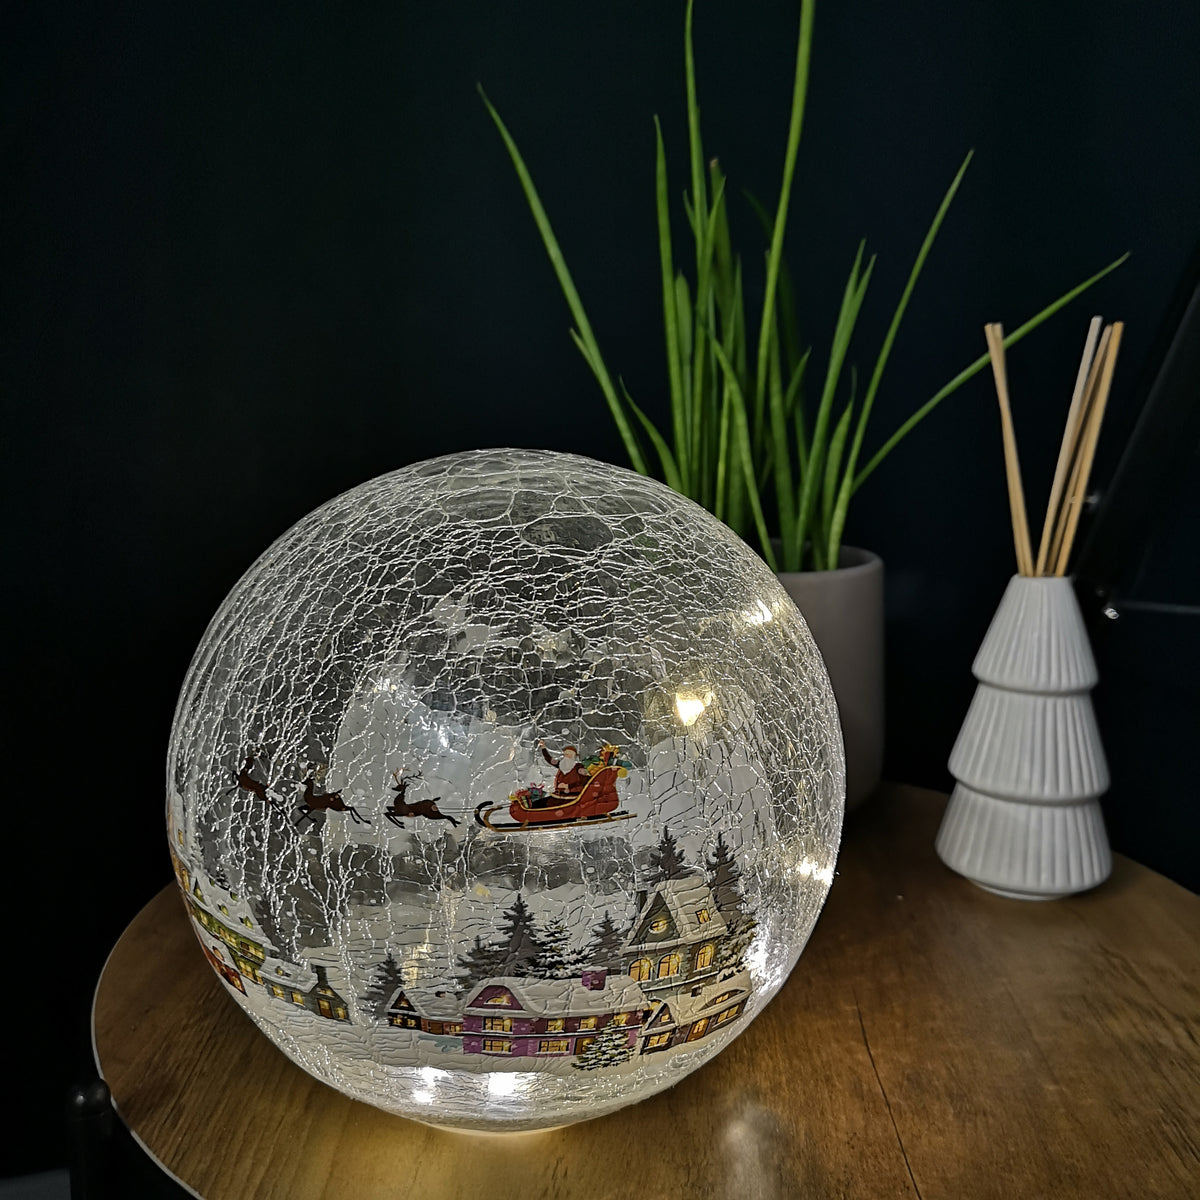 15cm Battery Operated Warm White LED Crackle Effect Ball Christmas Decoration with Village Scene